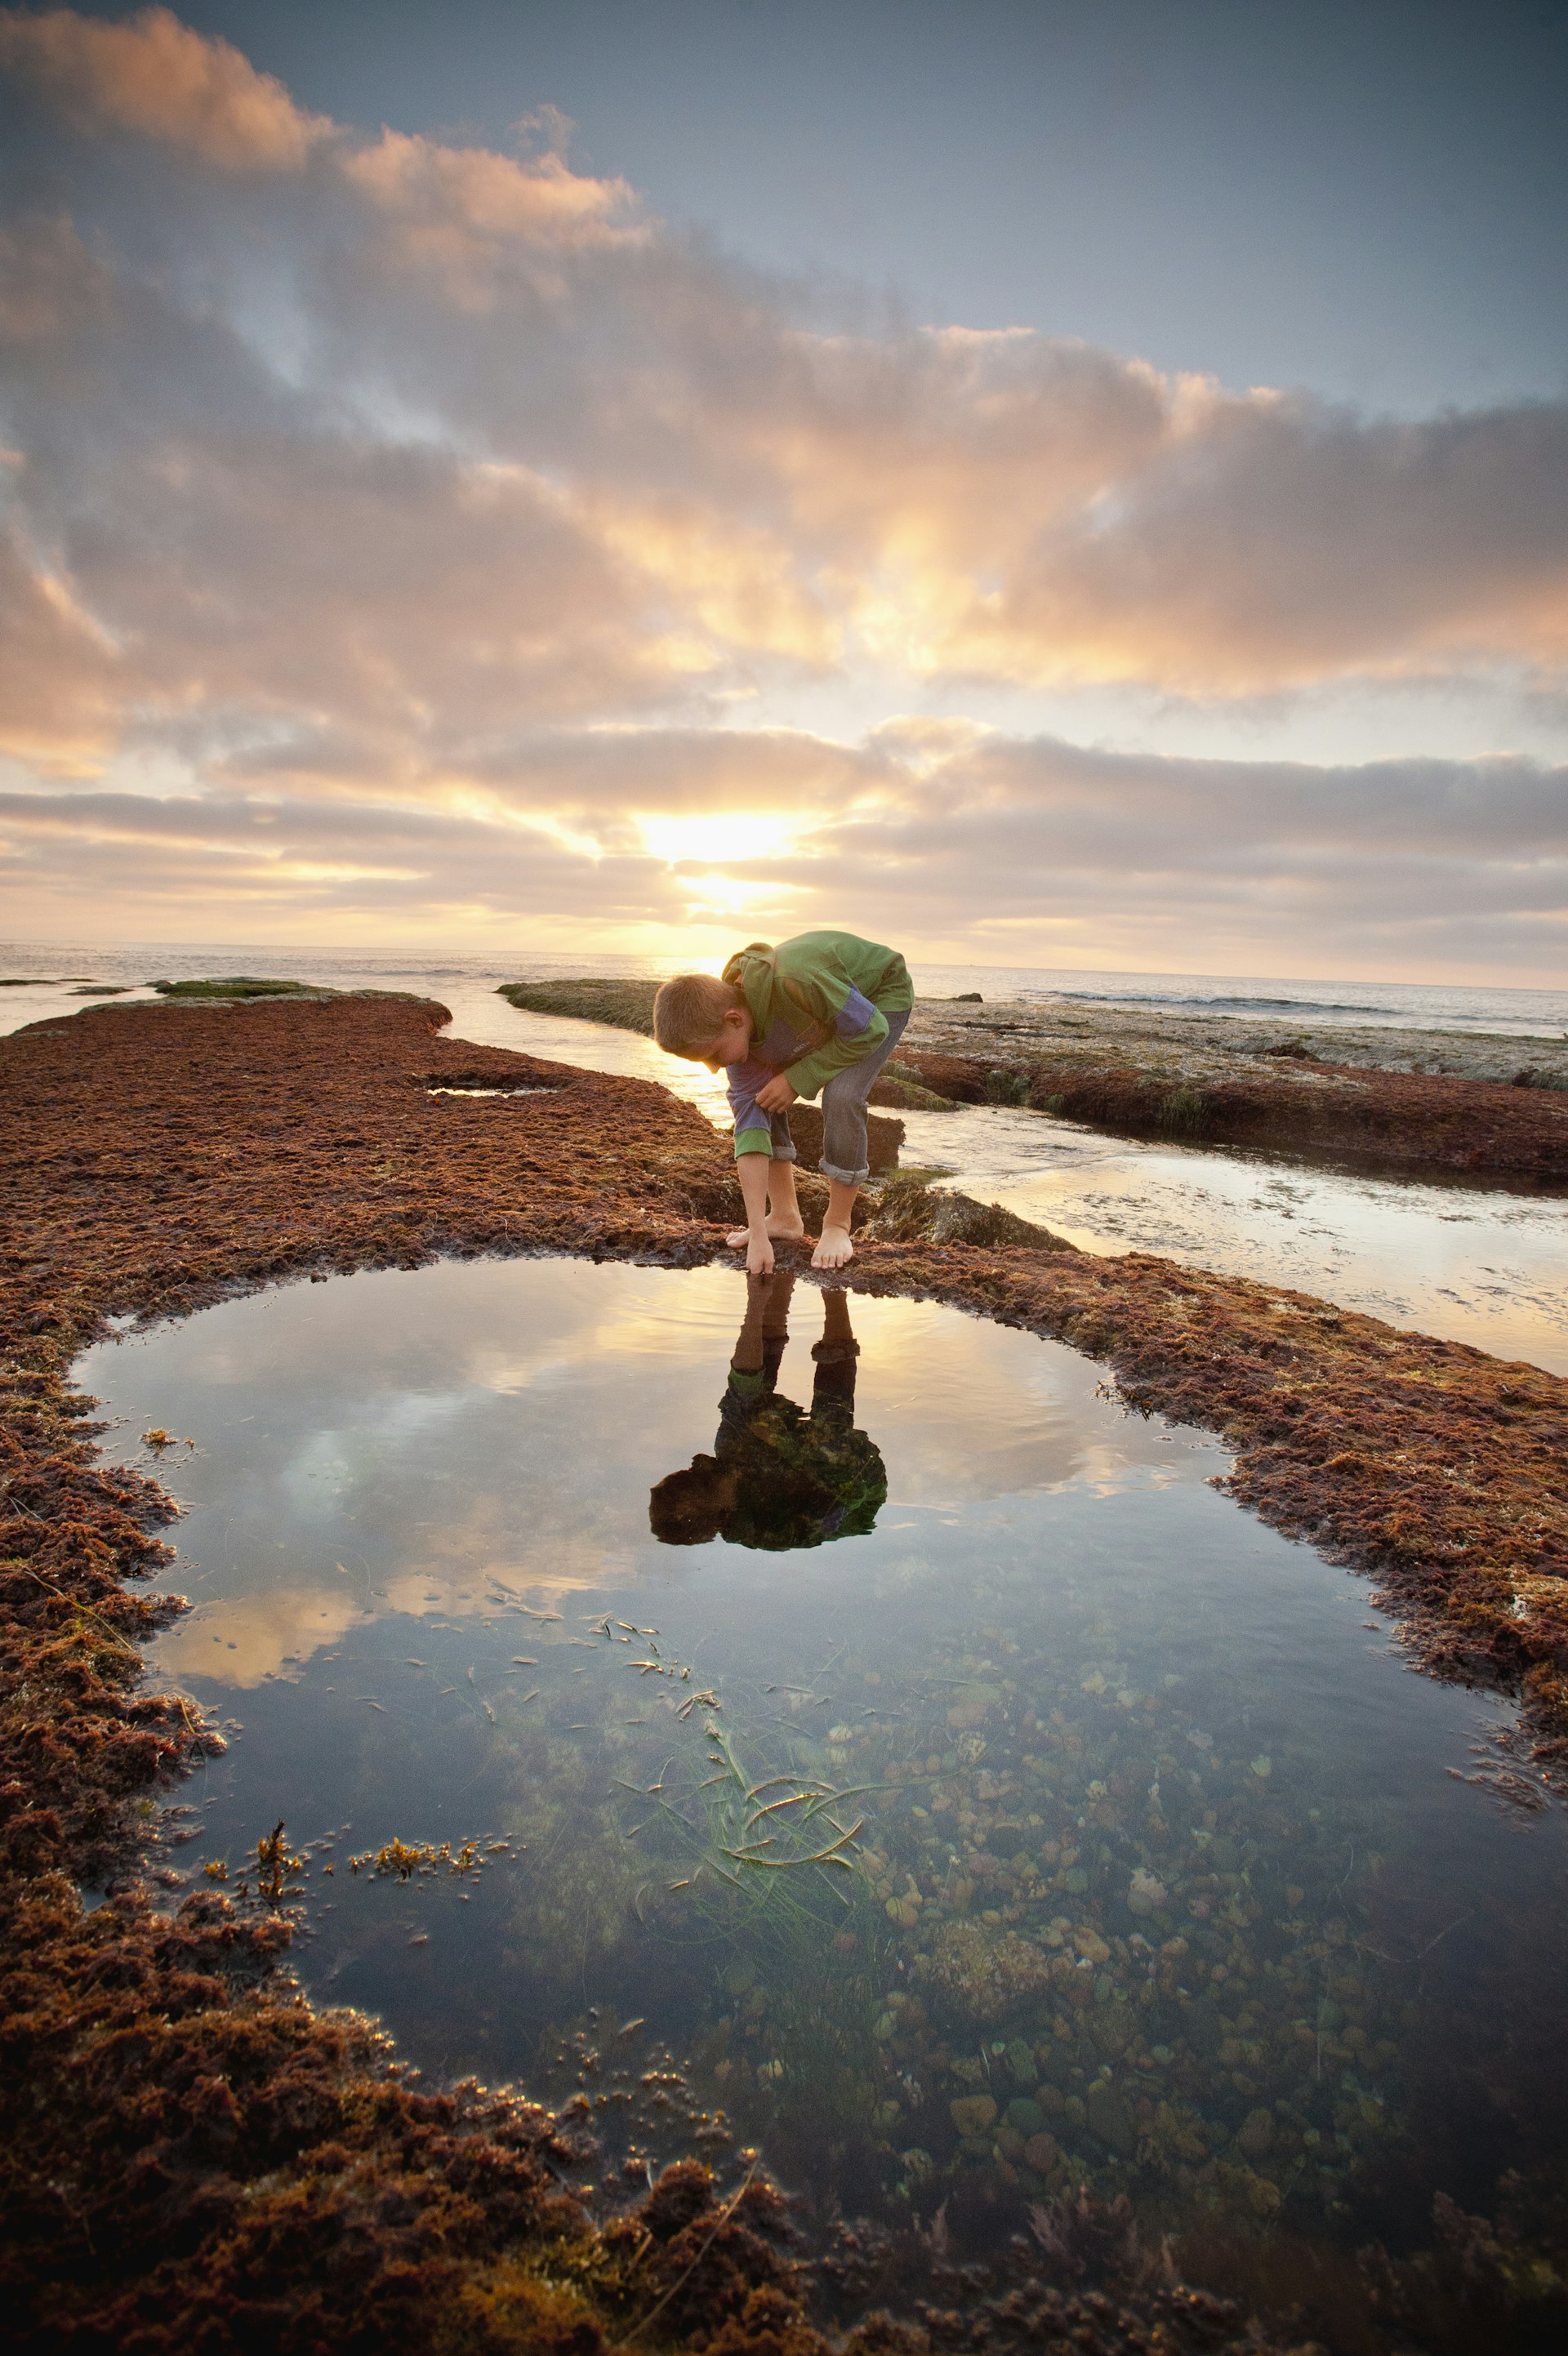 A boy examines a tide pool on the beach during sunset © Stephen Simpson / Getty Images